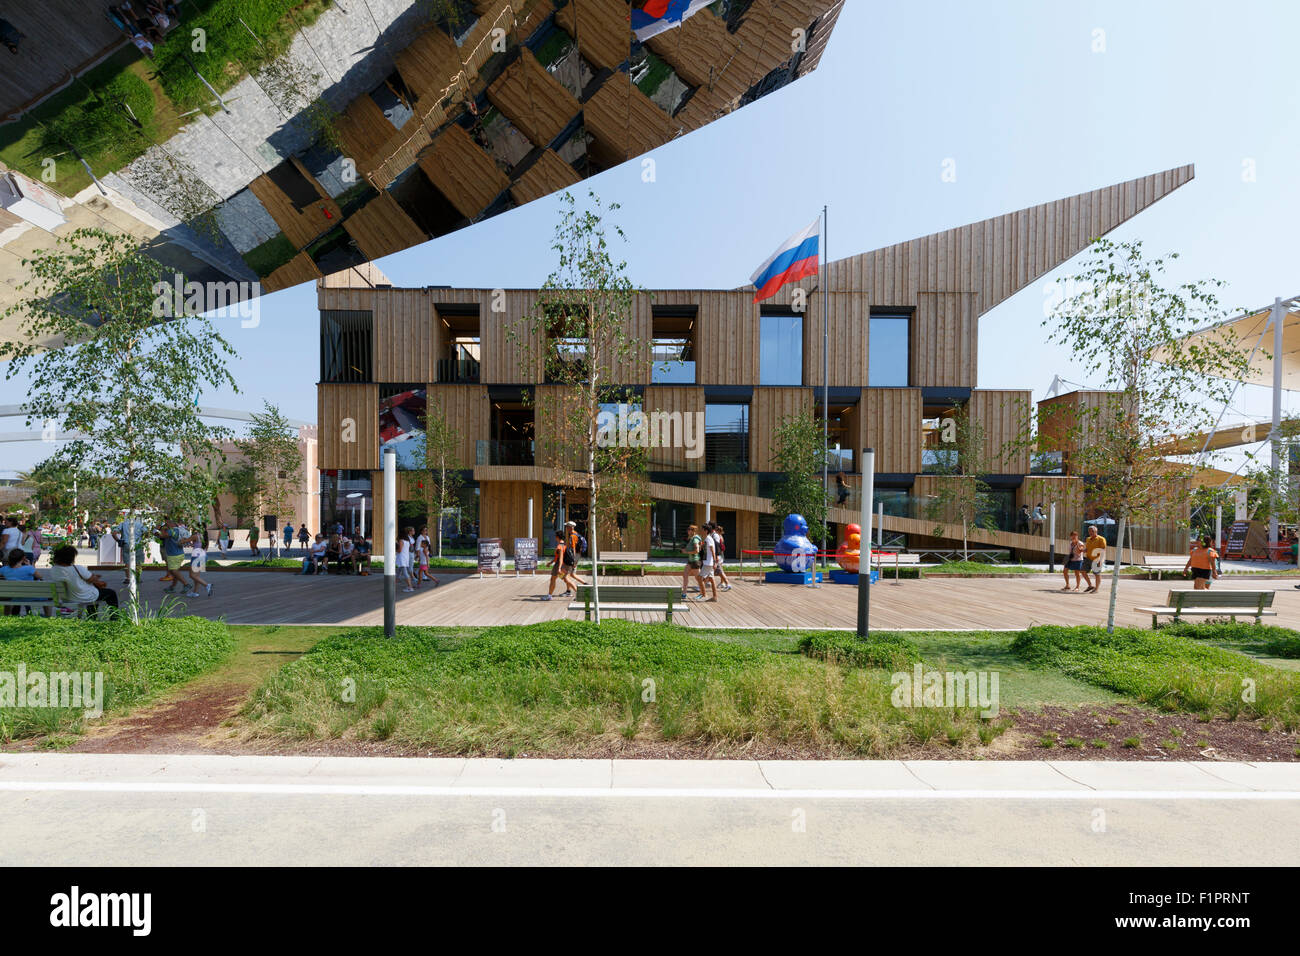 Milan, Italy, 12 August 2015: Detail of the Russian Federation pavilion at the exhibition Expo 2015 Italy. Stock Photo